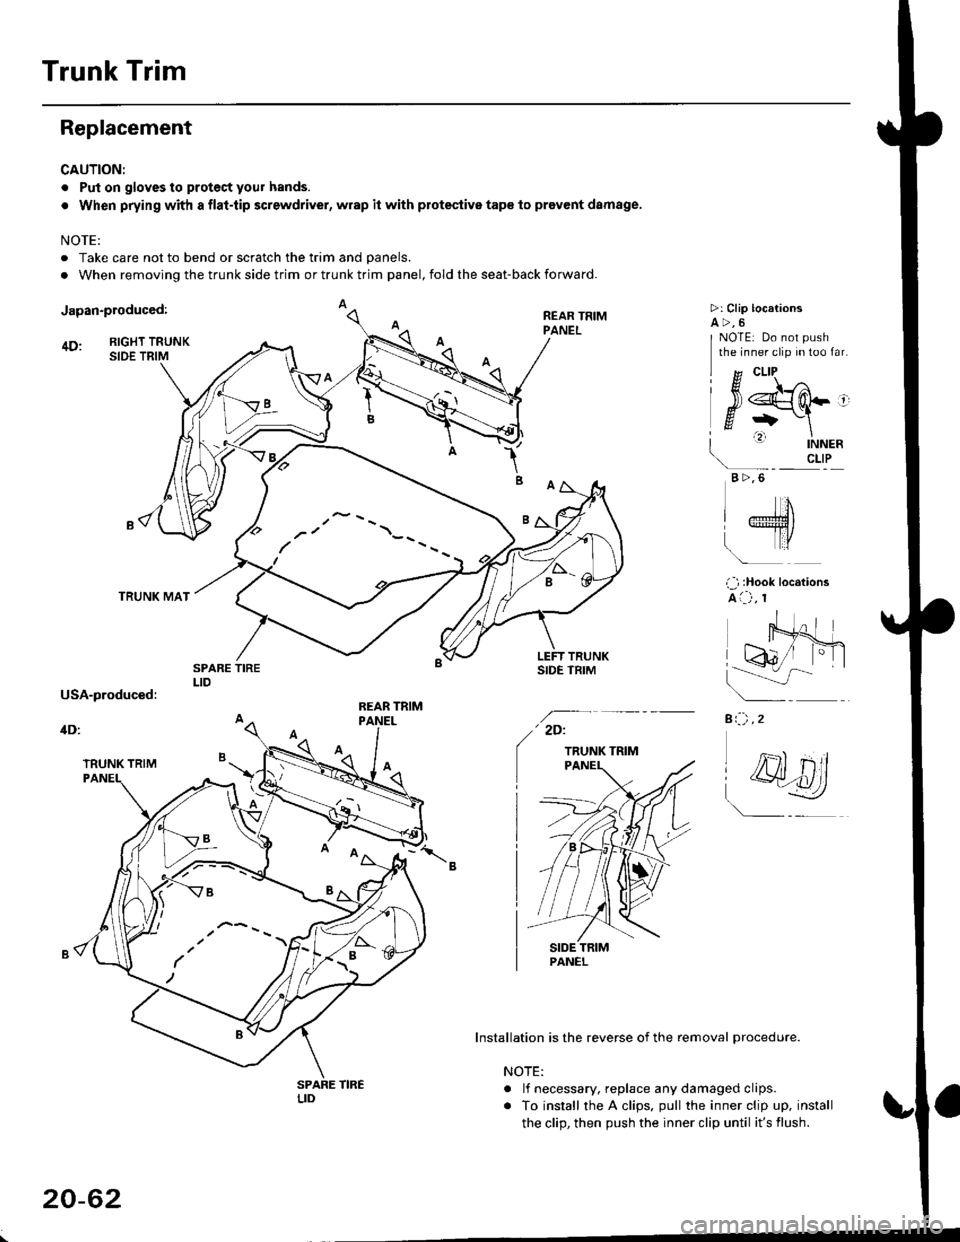 HONDA CIVIC 1999 6.G Workshop Manual Trunk Trim
Replacement
CAUTION:
. Put on gloves to proteci your hands.
. When prying with a flat-tip screwdriver, wrap it with protestive tap€ lo prevent damage.
NOTE:
. Take care not to bend or scr